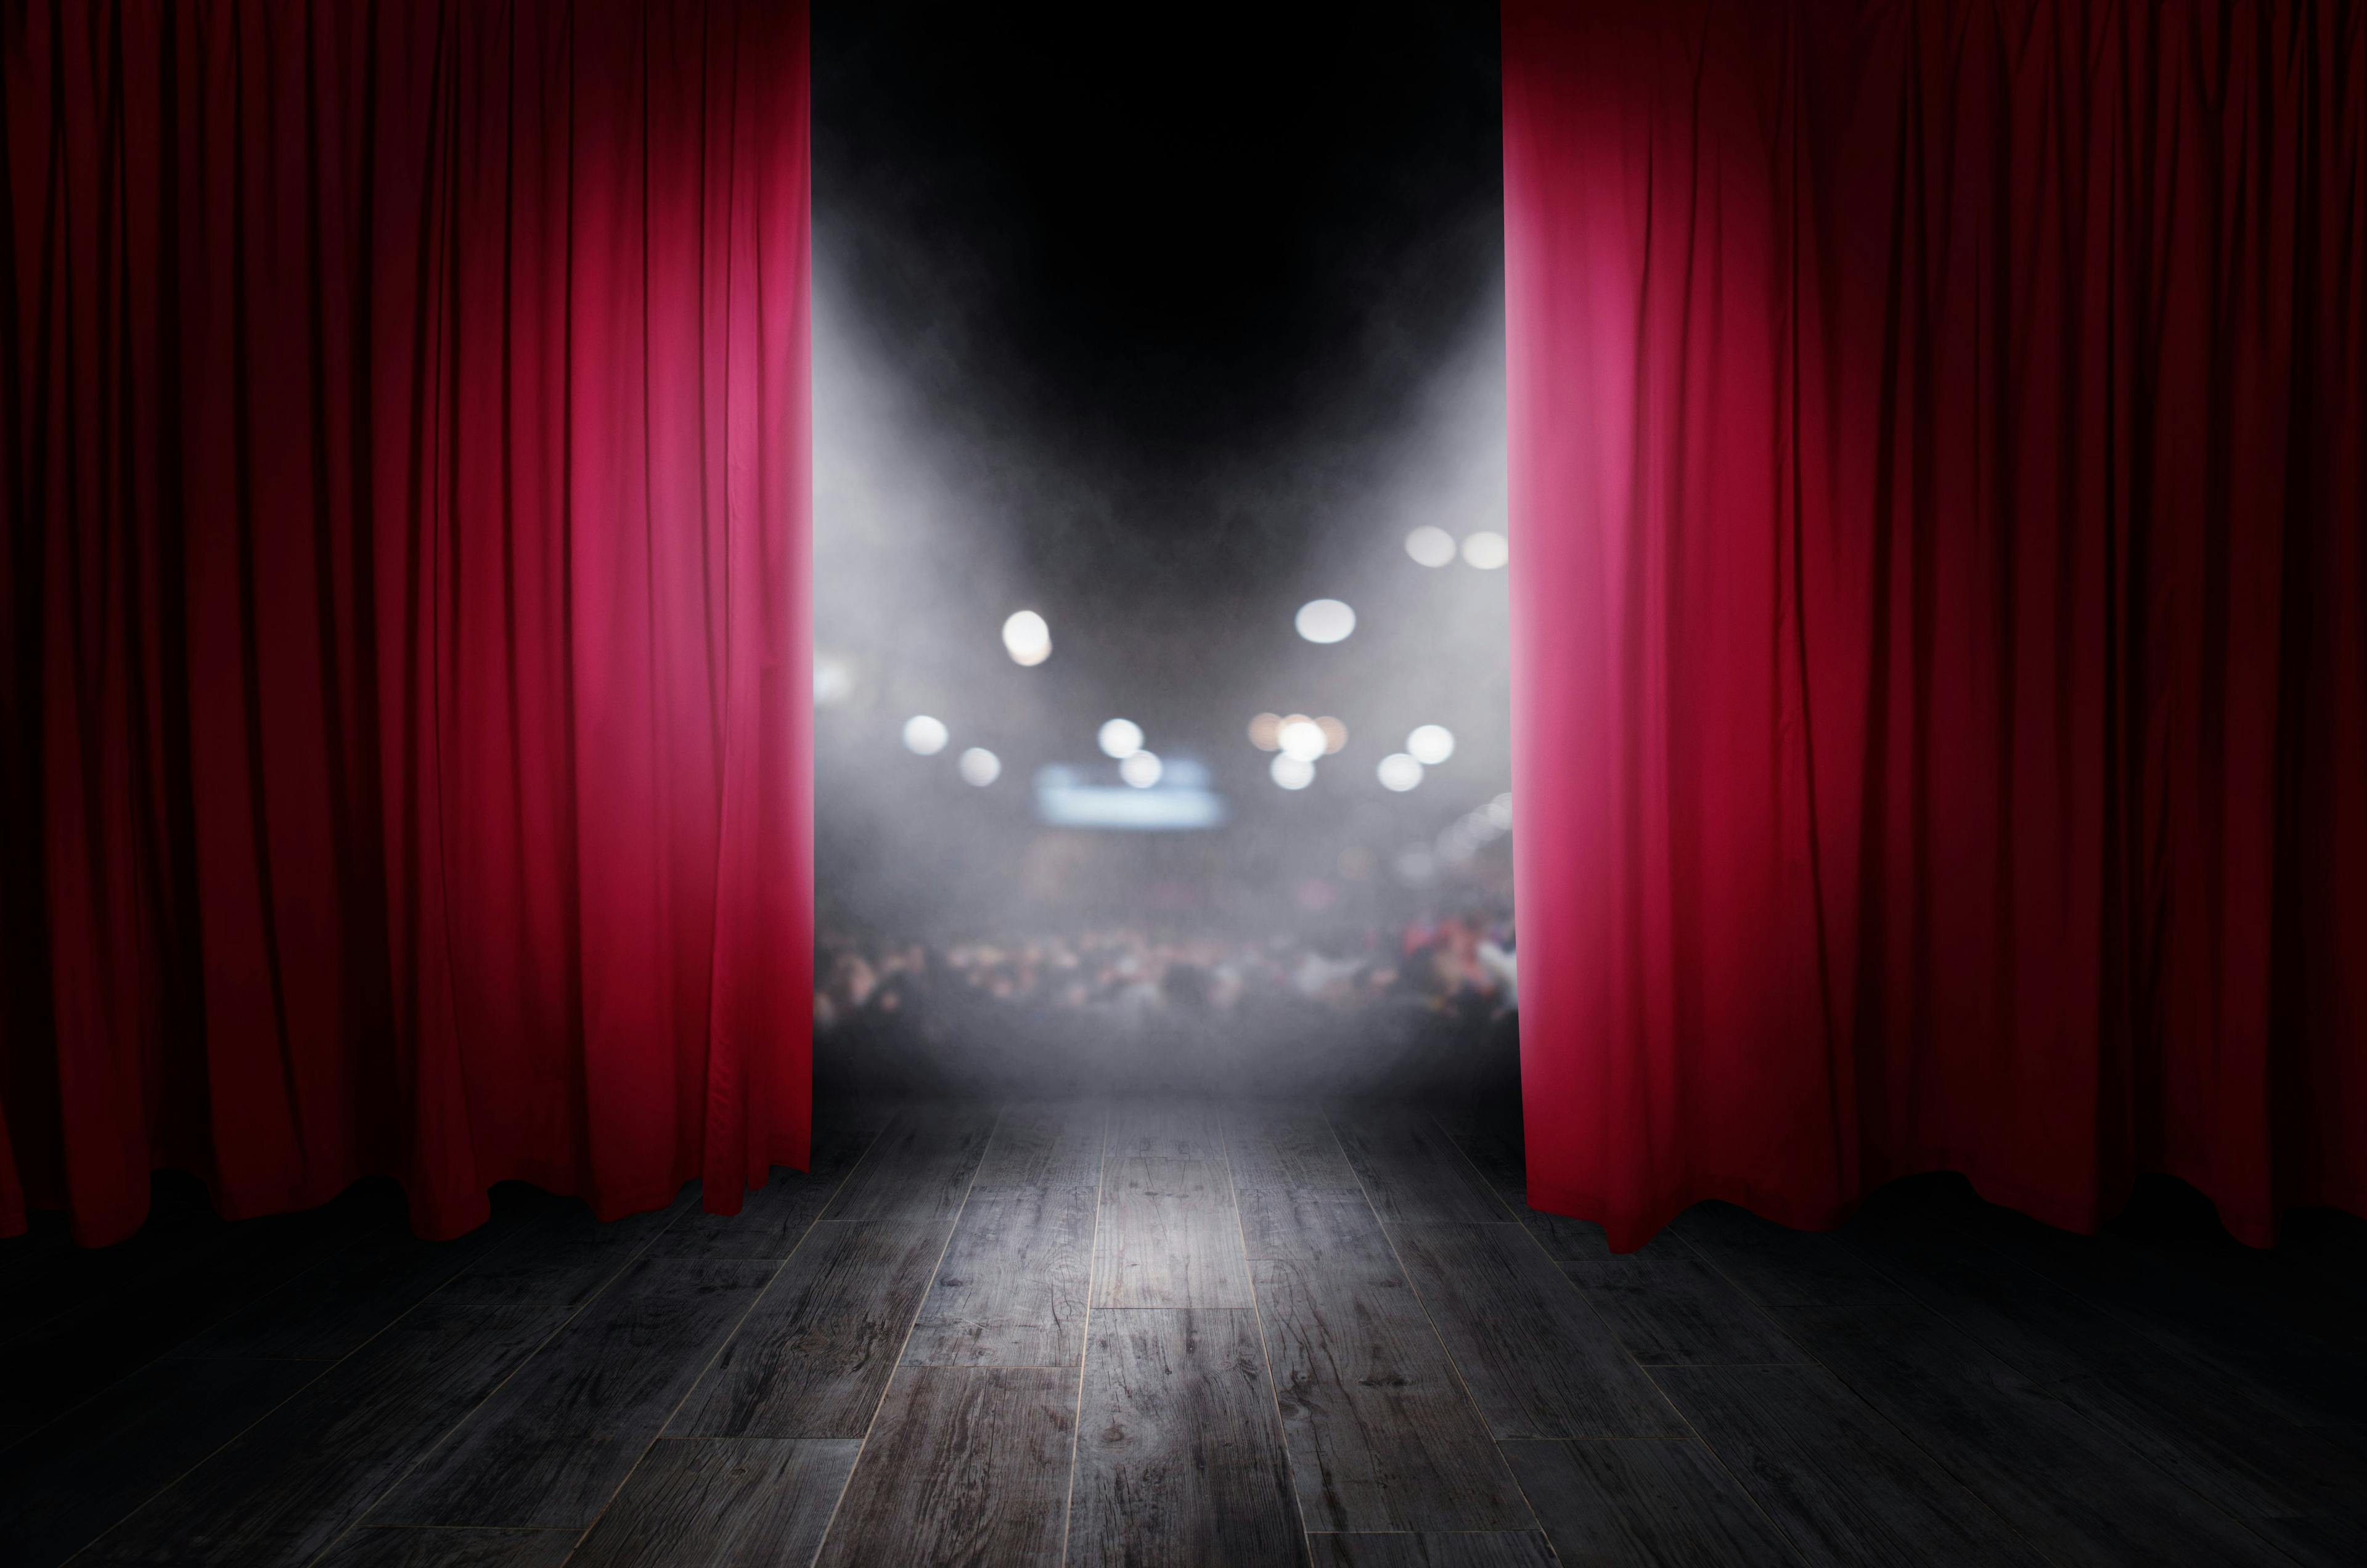 The red curtains are opening for the theater show | Image credit: © - alphaspirit © - stock.adobe.com